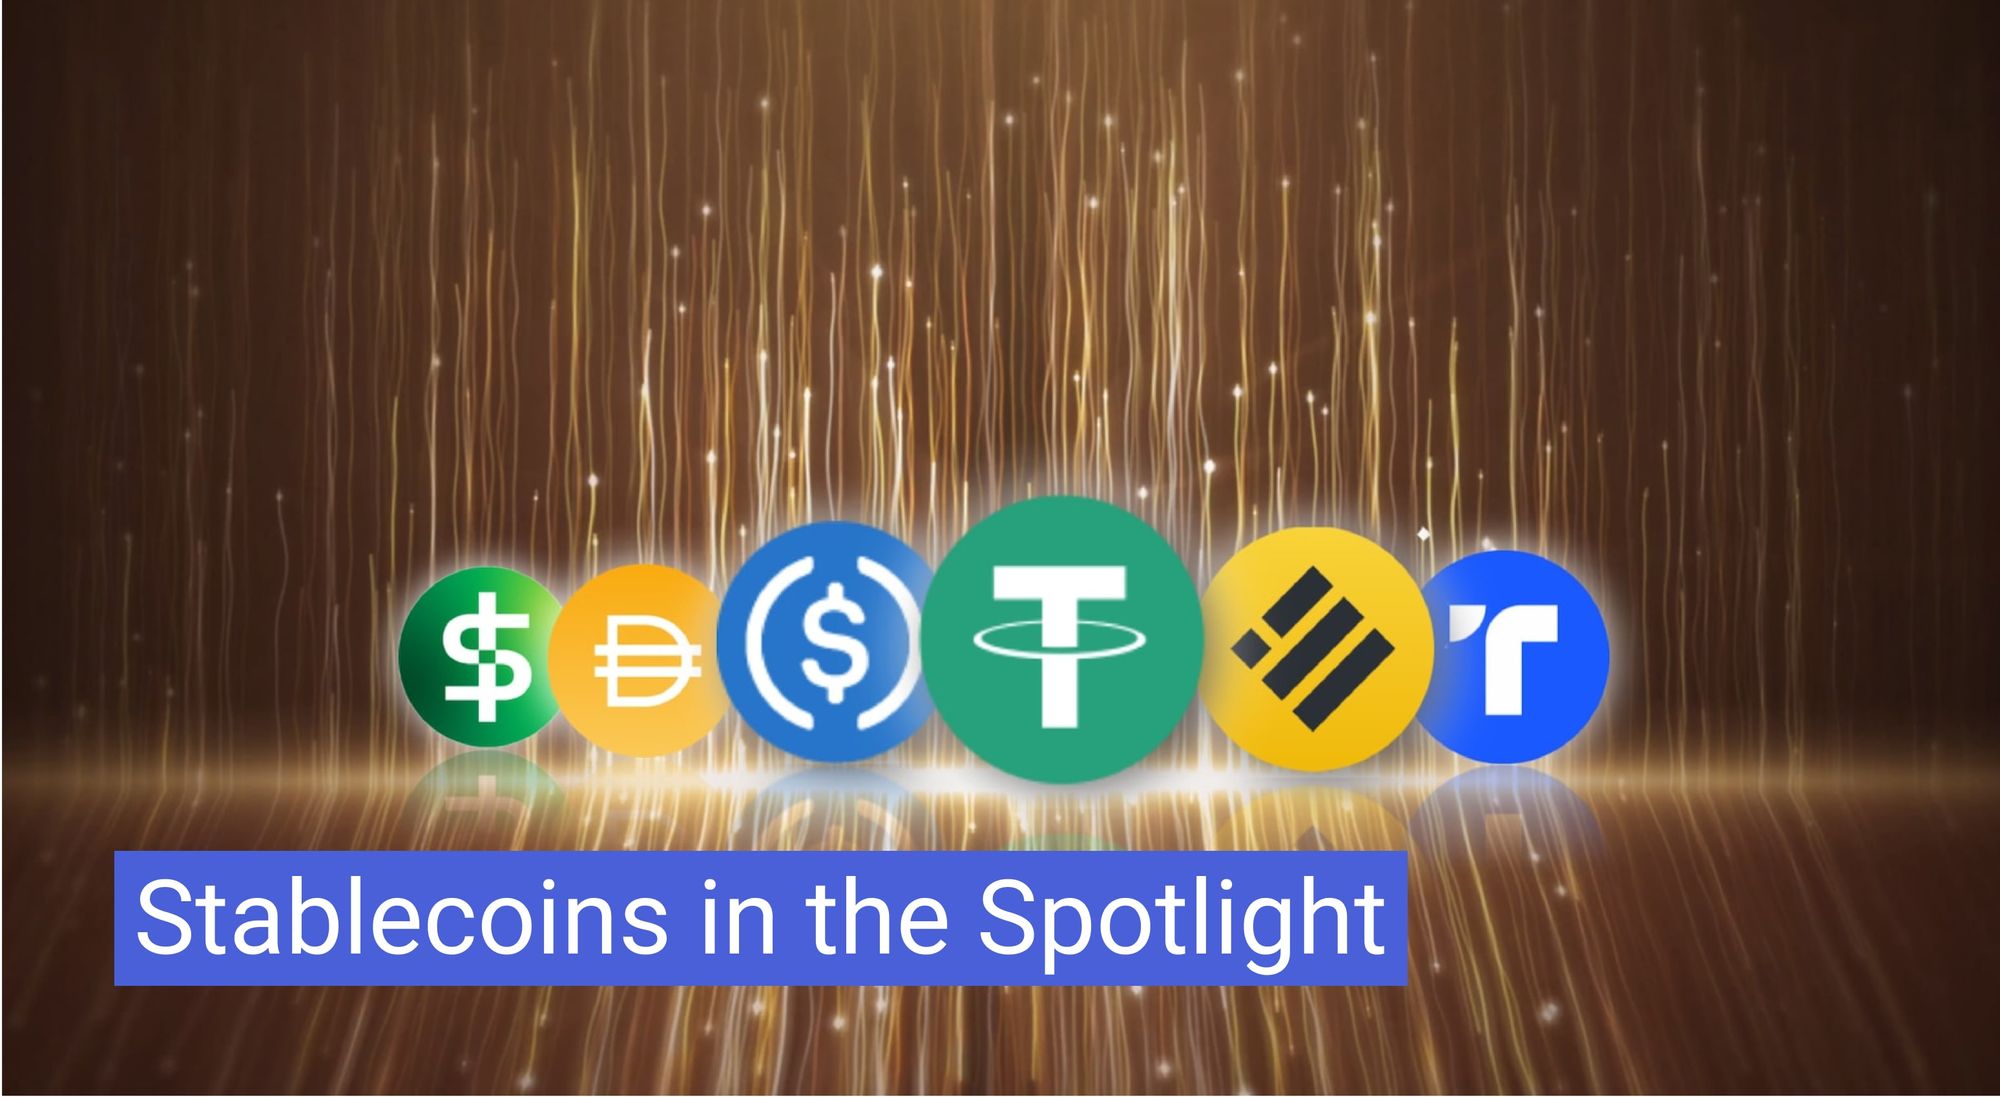 Stablecoins in the Spotlight